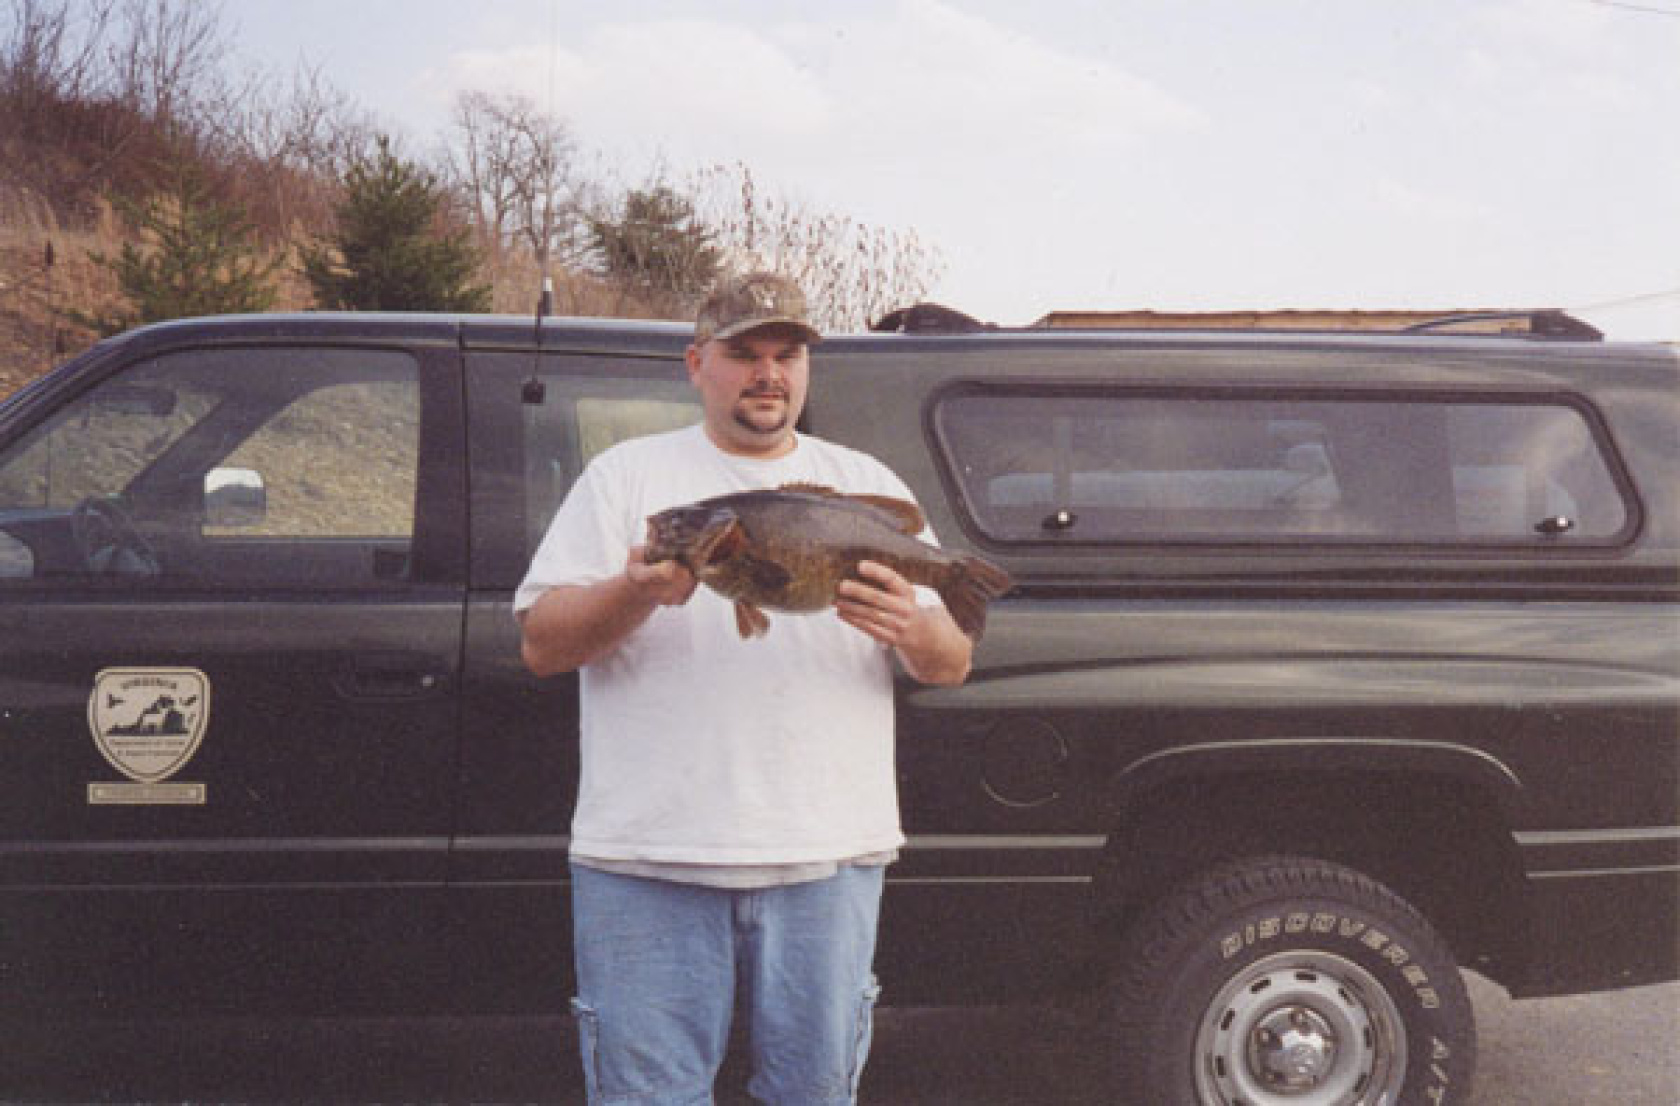 Donald S. Eaton Jr set the bass fishing record in Virginia for smallmouth bass.